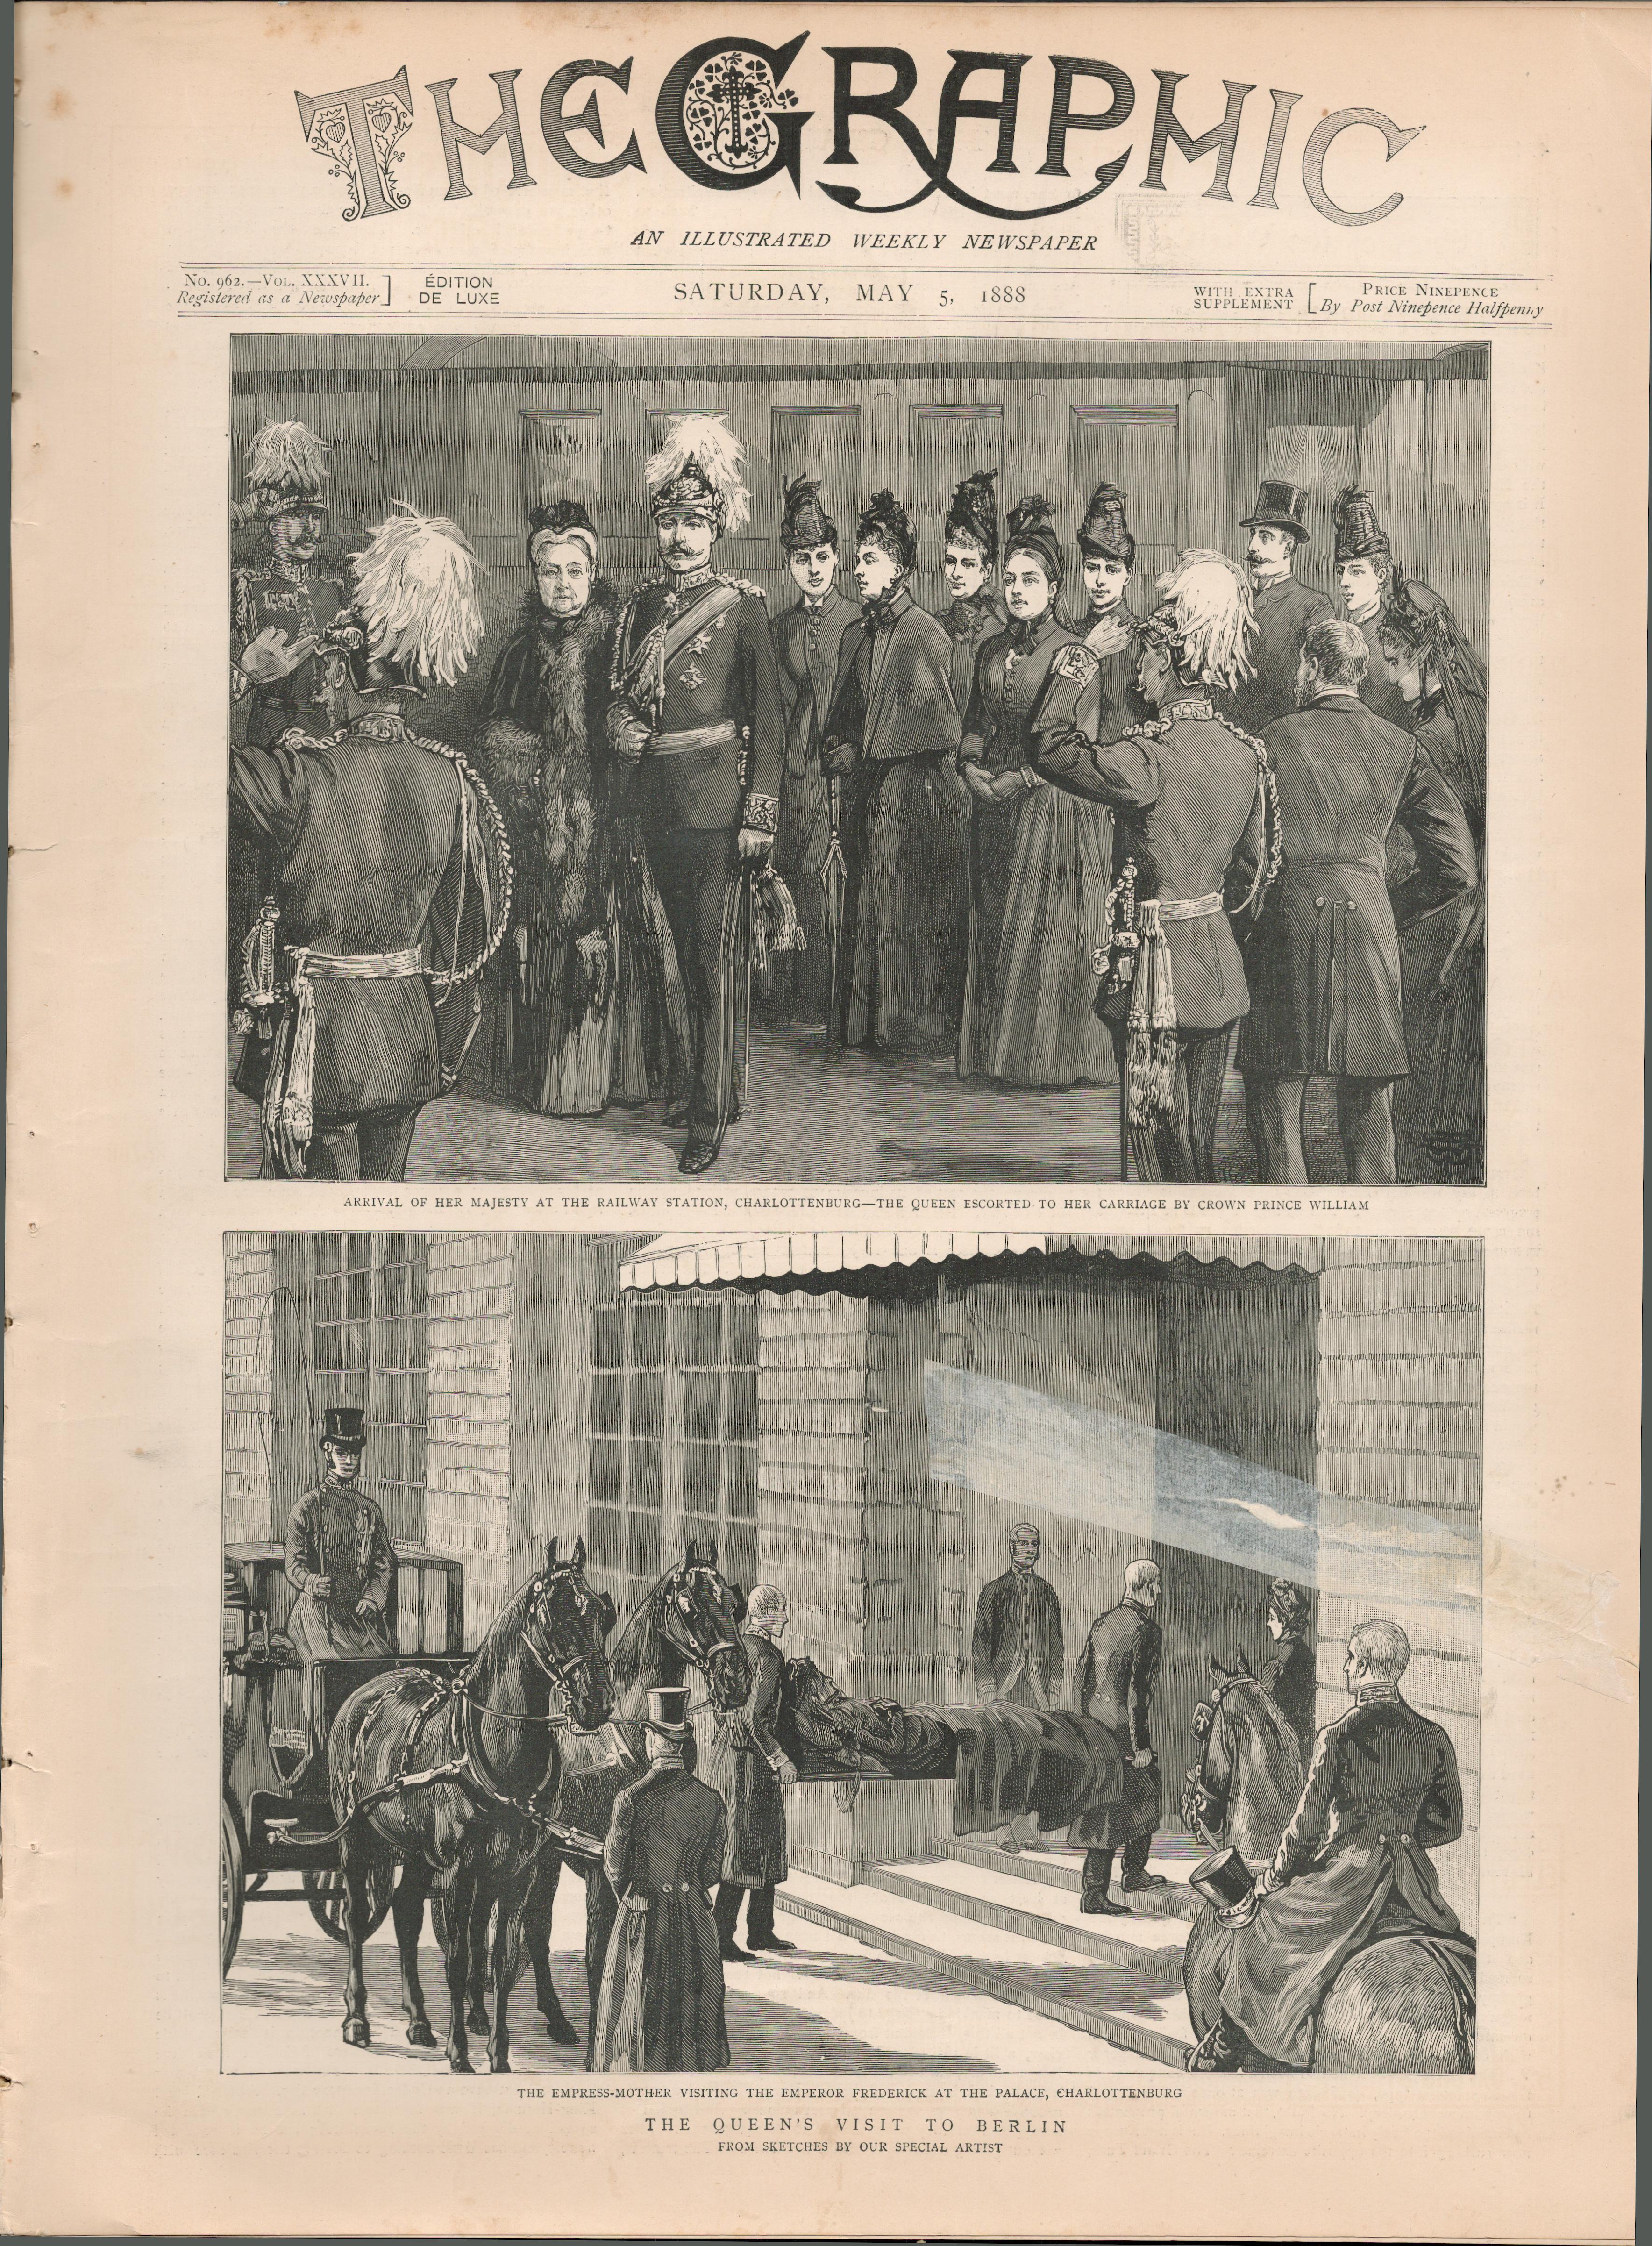 Holding A Proclaimed Meeting at Sea Coast of Cork 1888 Newspaper - Image 2 of 2